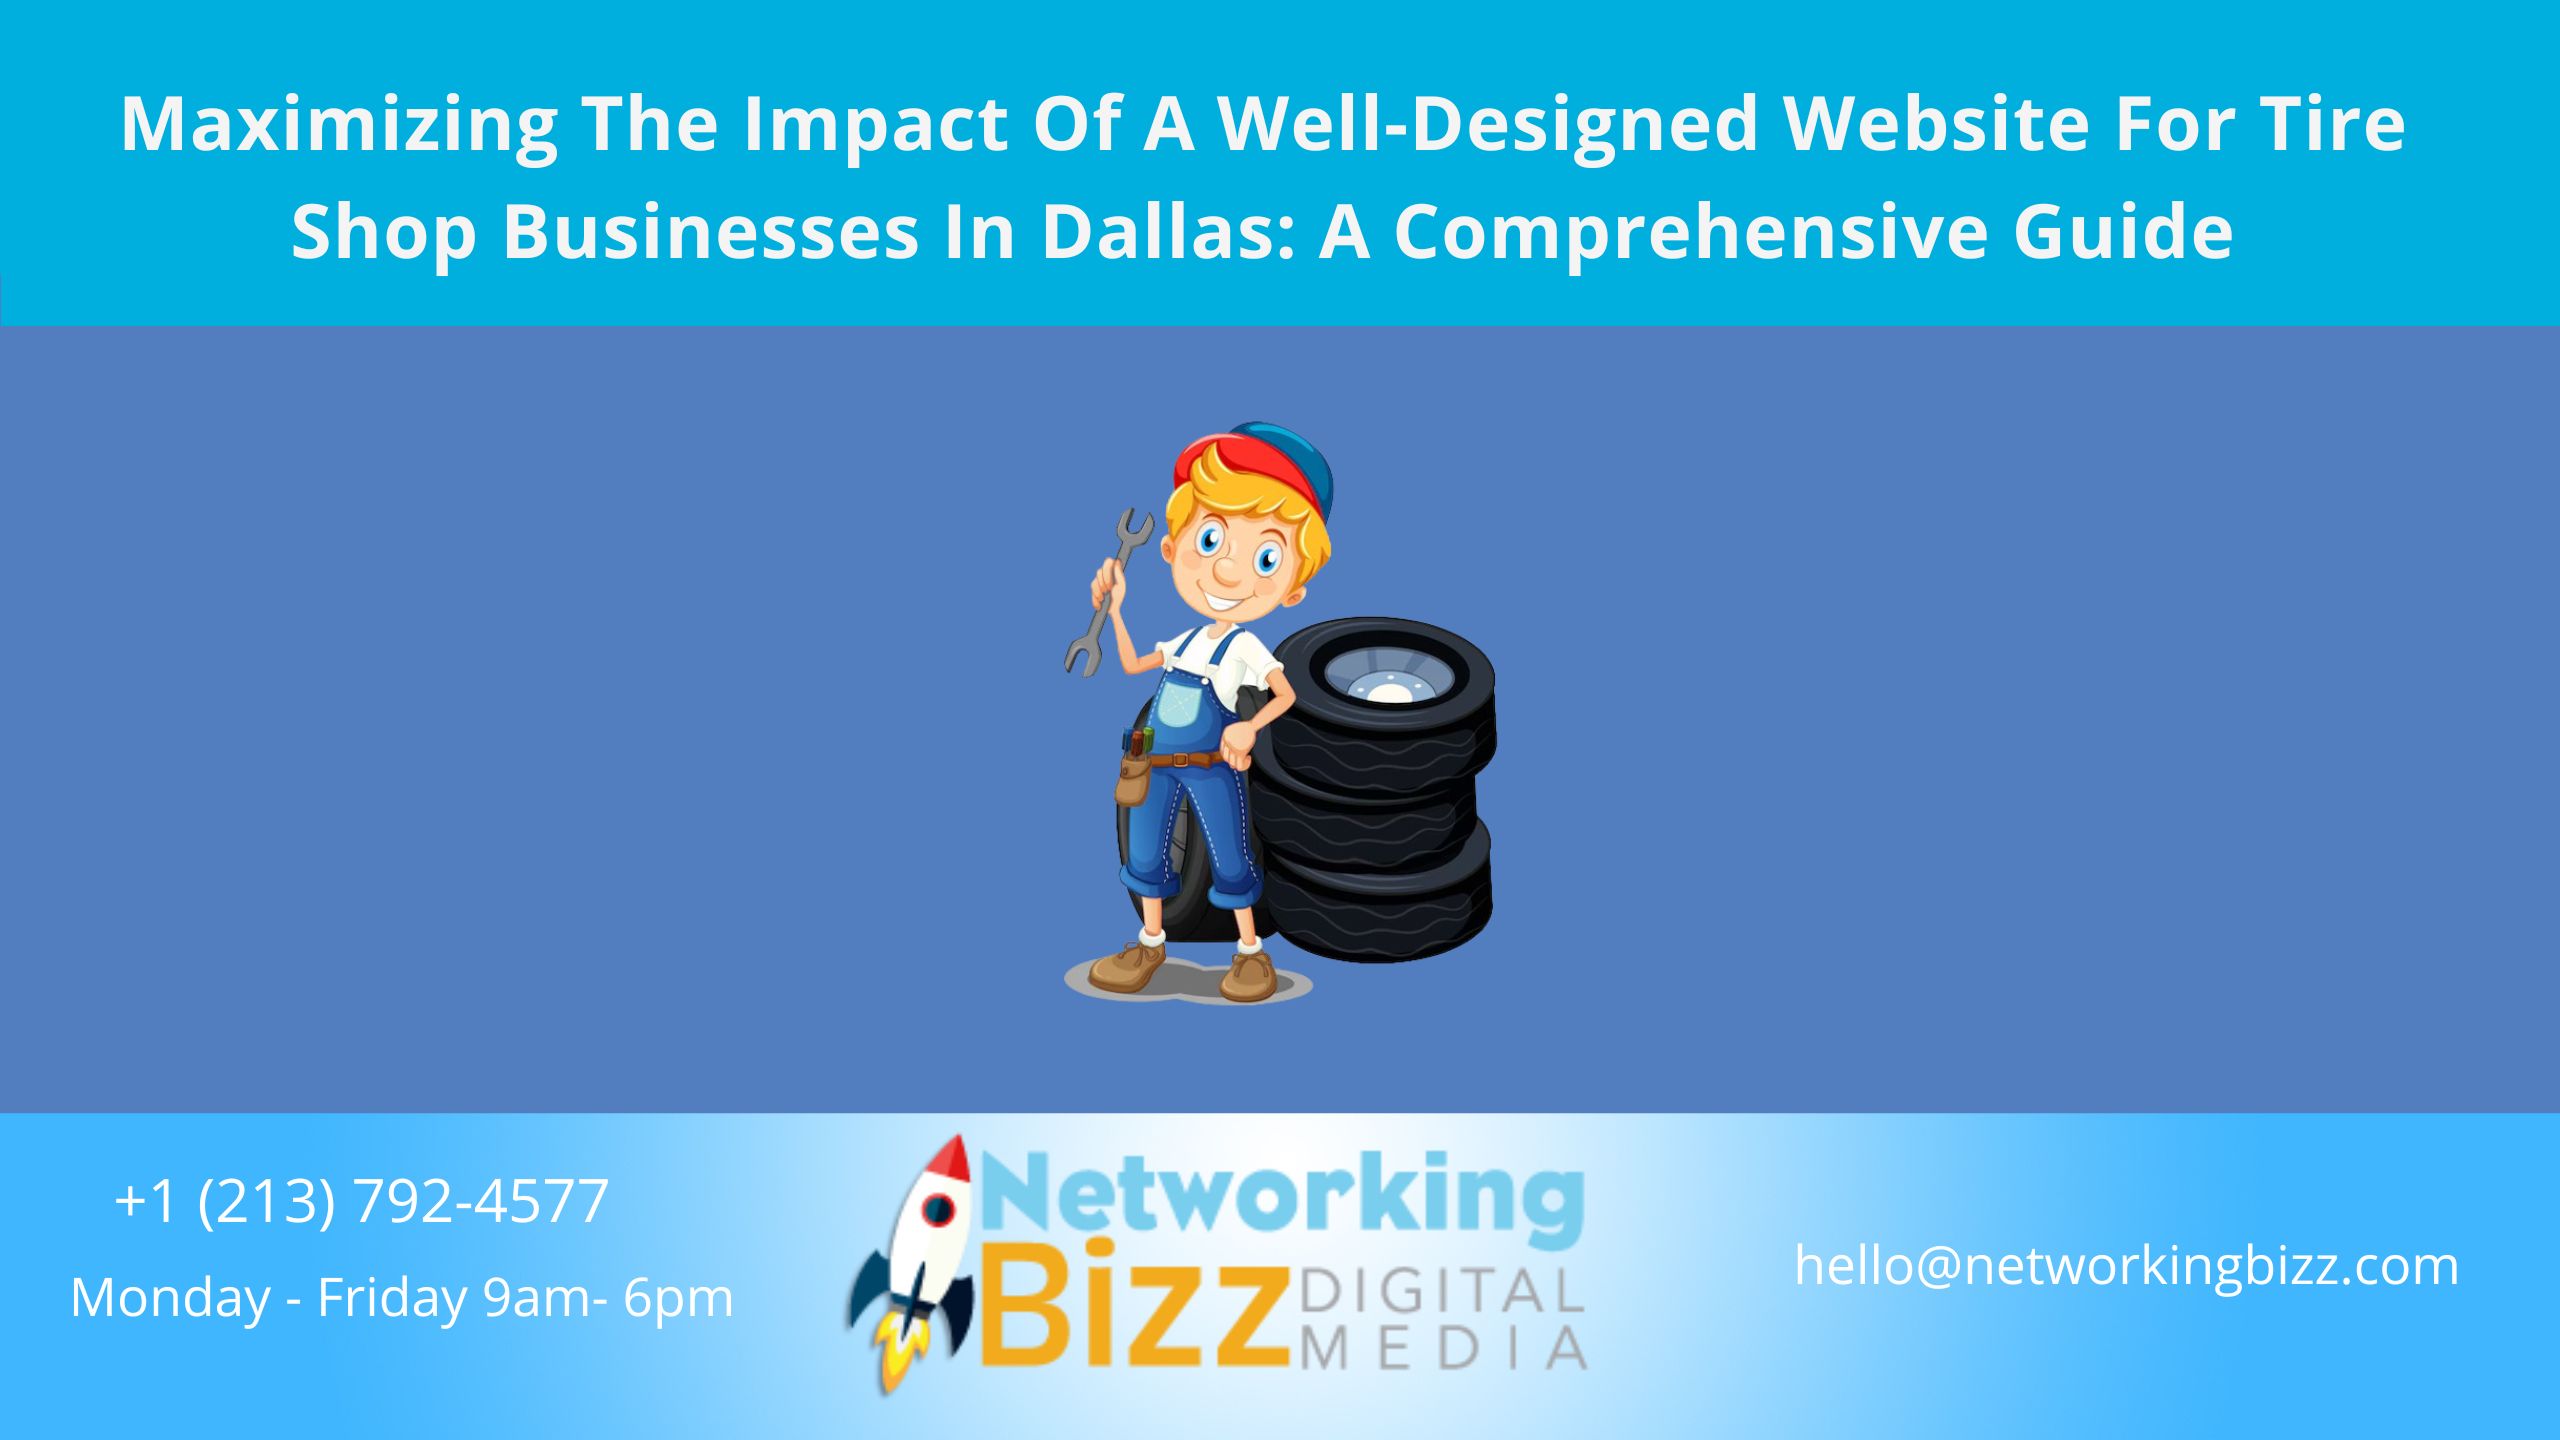 Maximizing The Impact Of A Well-Designed Website For Tire Shop Businesses In Dallas: A Comprehensive Guide